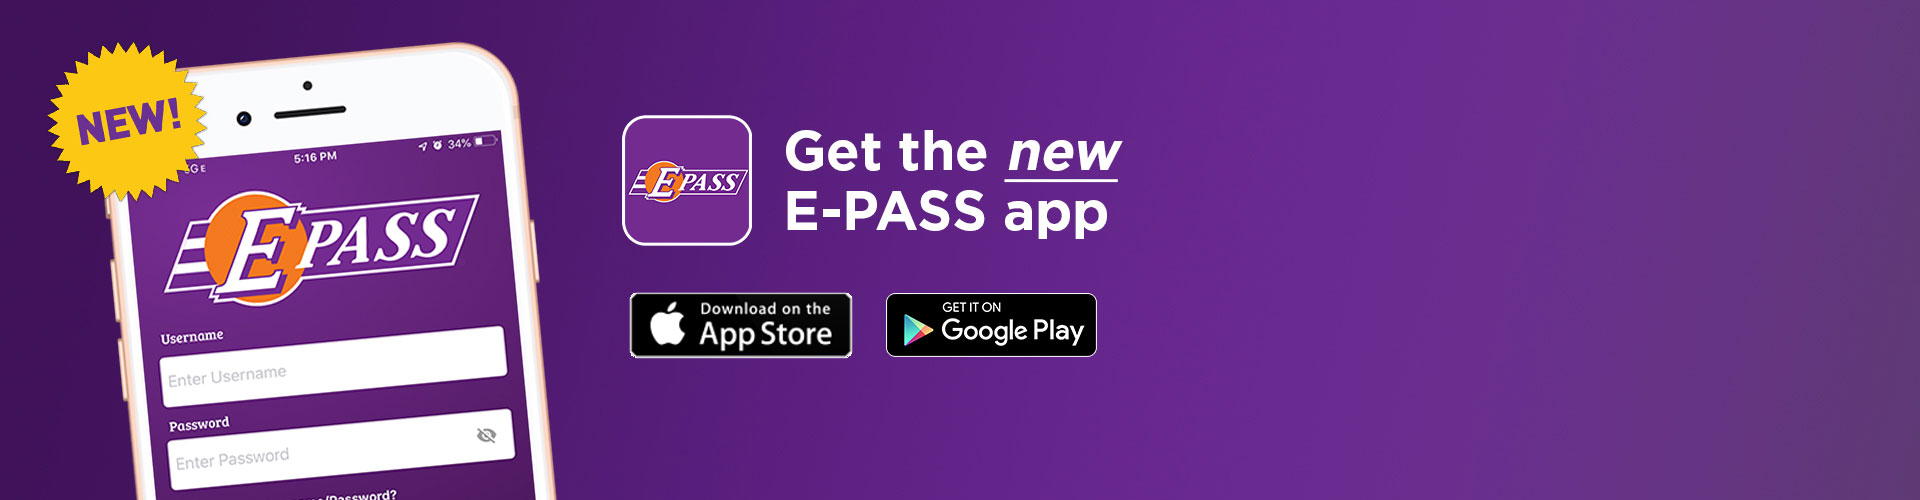 Download the new, free E-PASS app - opens in a new window